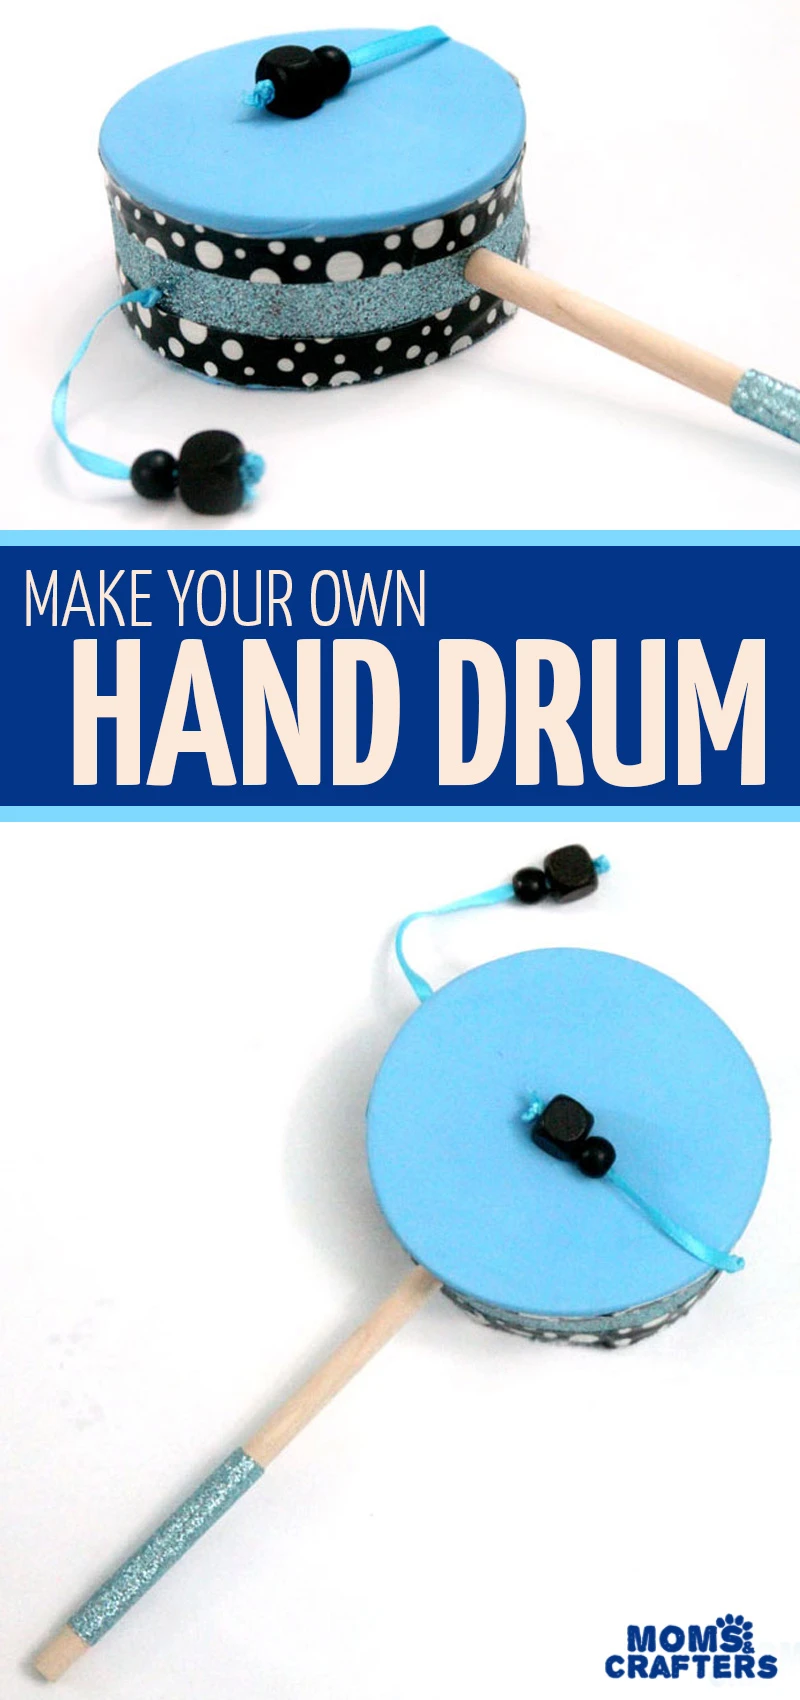 Make this super cool DIY toy hand drum with balloons, recycled Pringles containers and other basic craft supplies you probably have handy! #diytoy #noisemaker #newyearseve #kidscrafts #diymusicalinstrument #diymusic #musicalinstrument